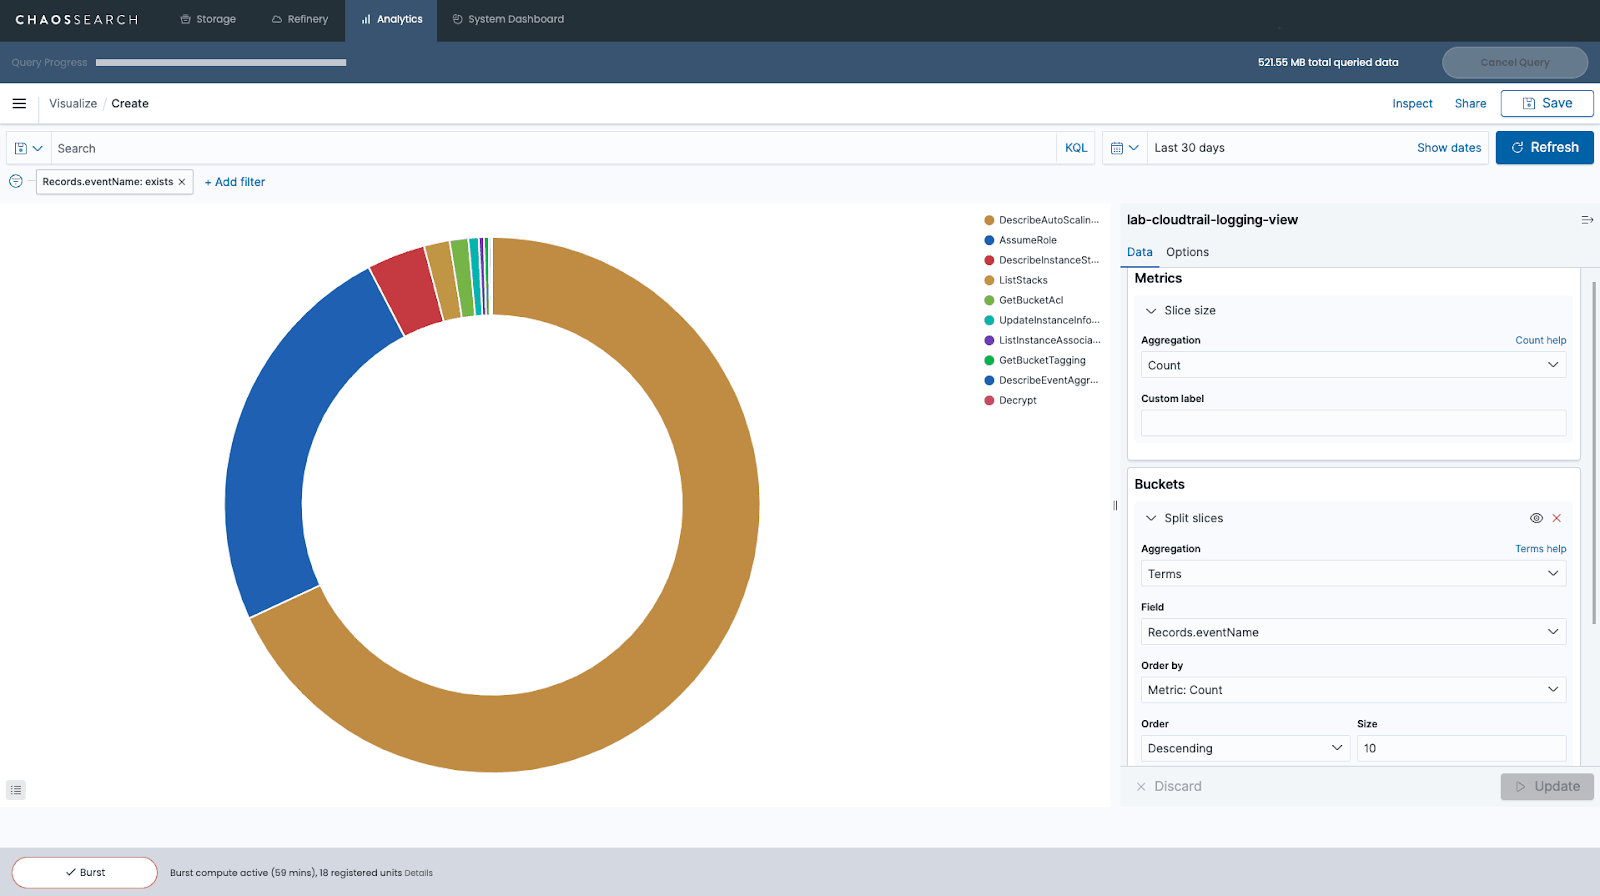 Configuring the Kibana visualization builder for a pie chart